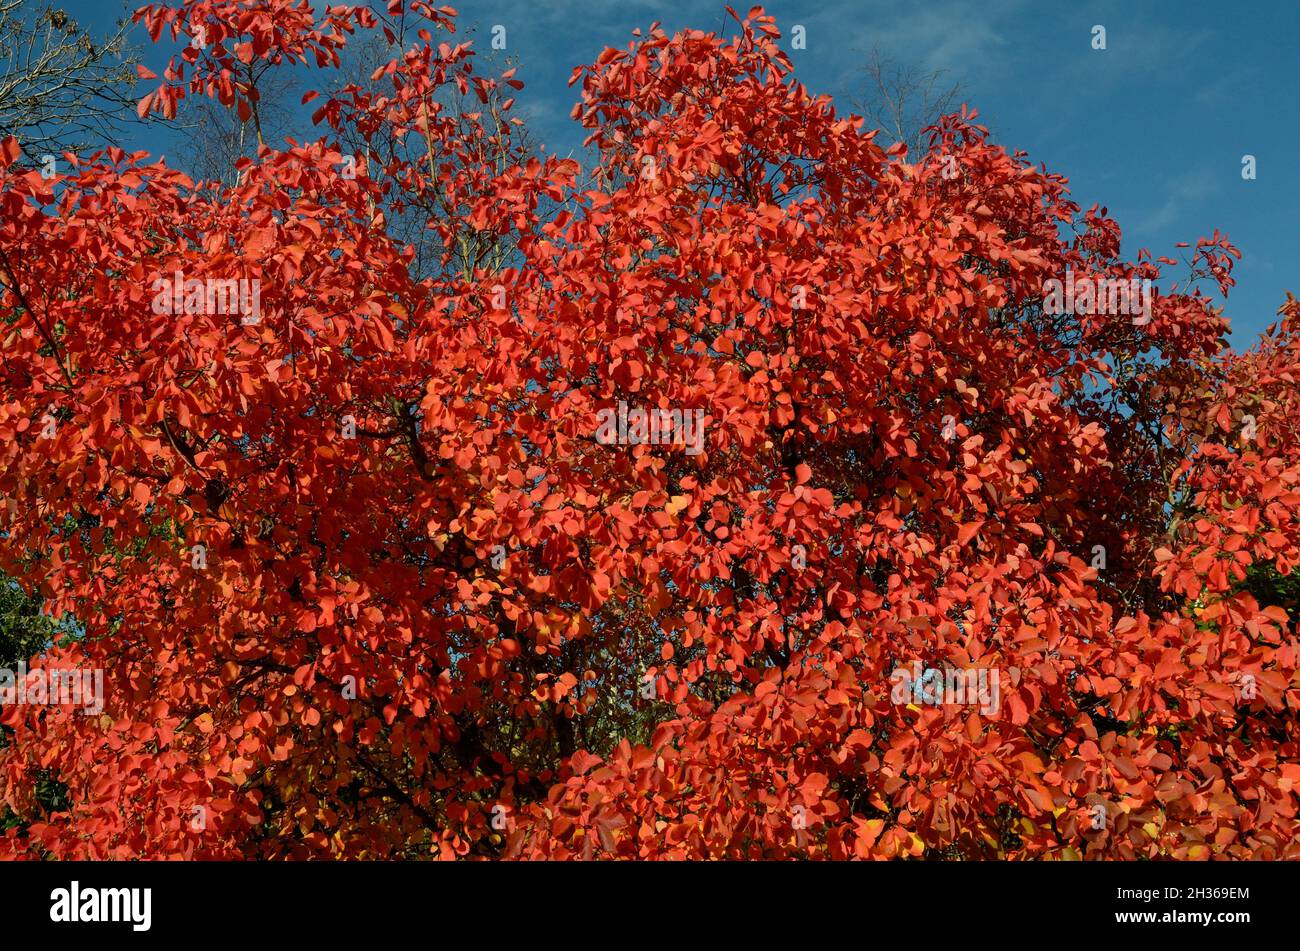 Brilliant red orange leaves of the Cotinus Flame tree Smoke tree in autumn against a blue sky Stock Photo